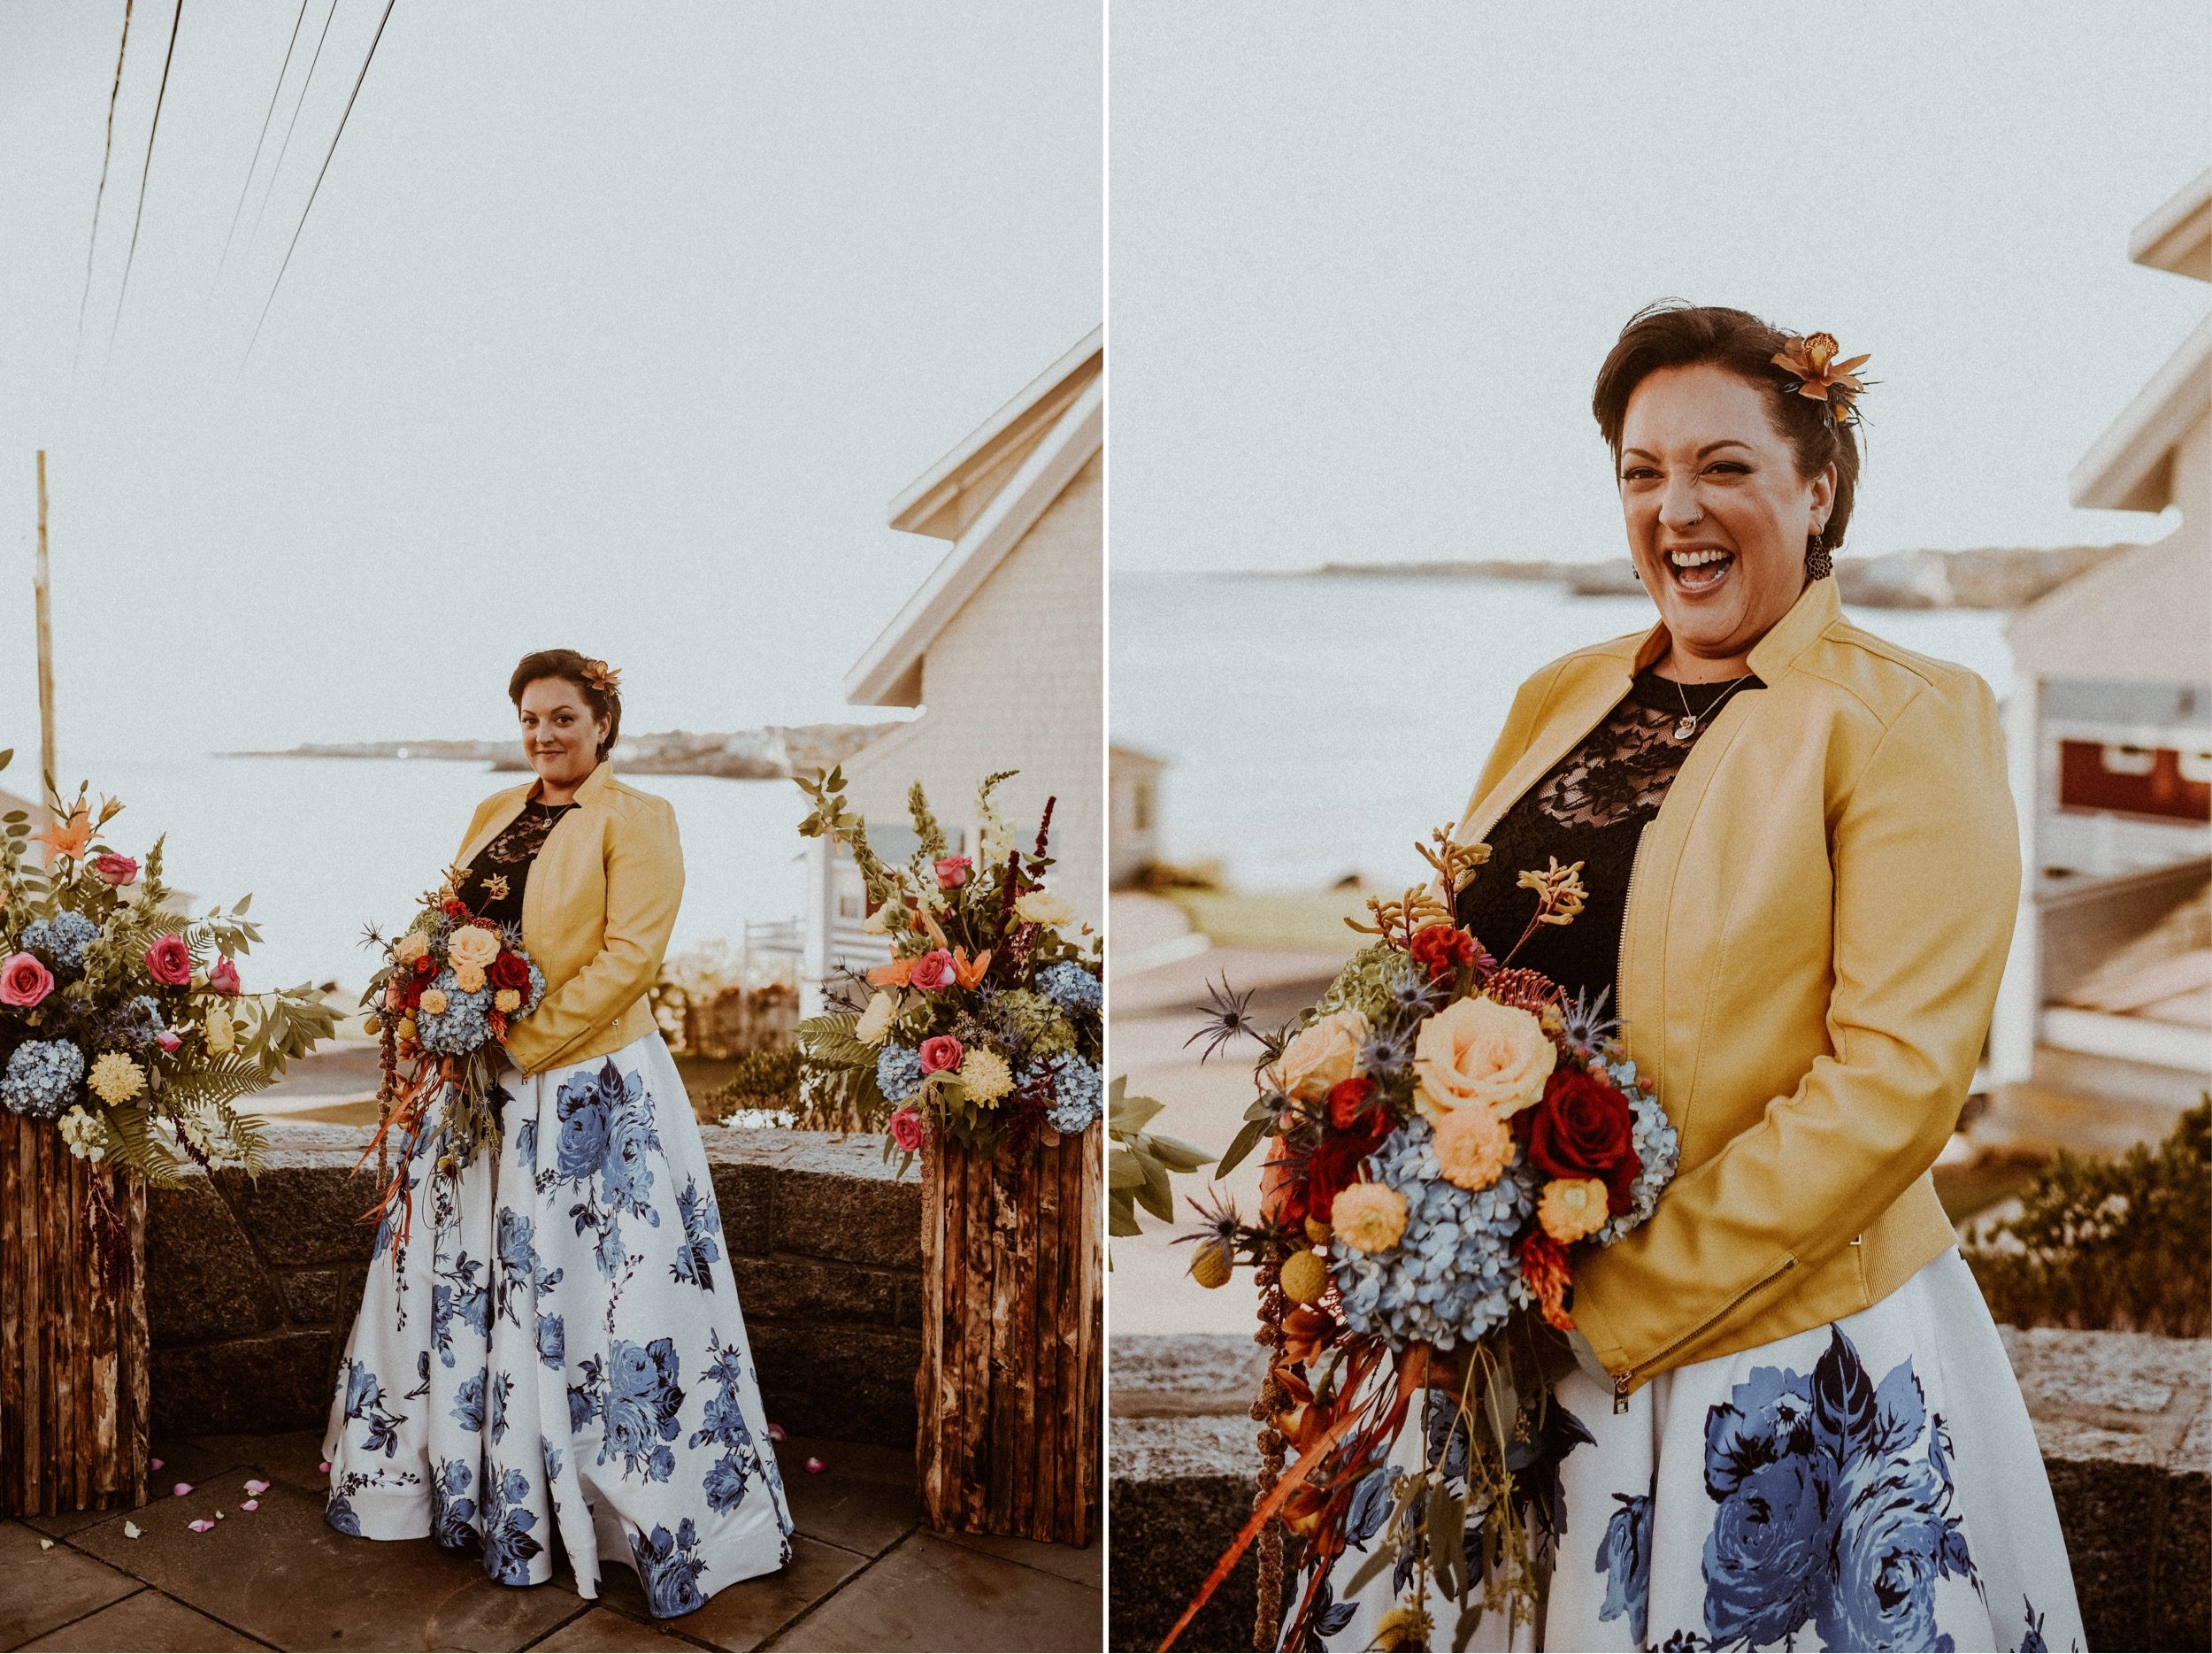 65_Colorful Intimate LGBTQ Wedding in Rockport MA - Vanessa Alves Photography.jpg